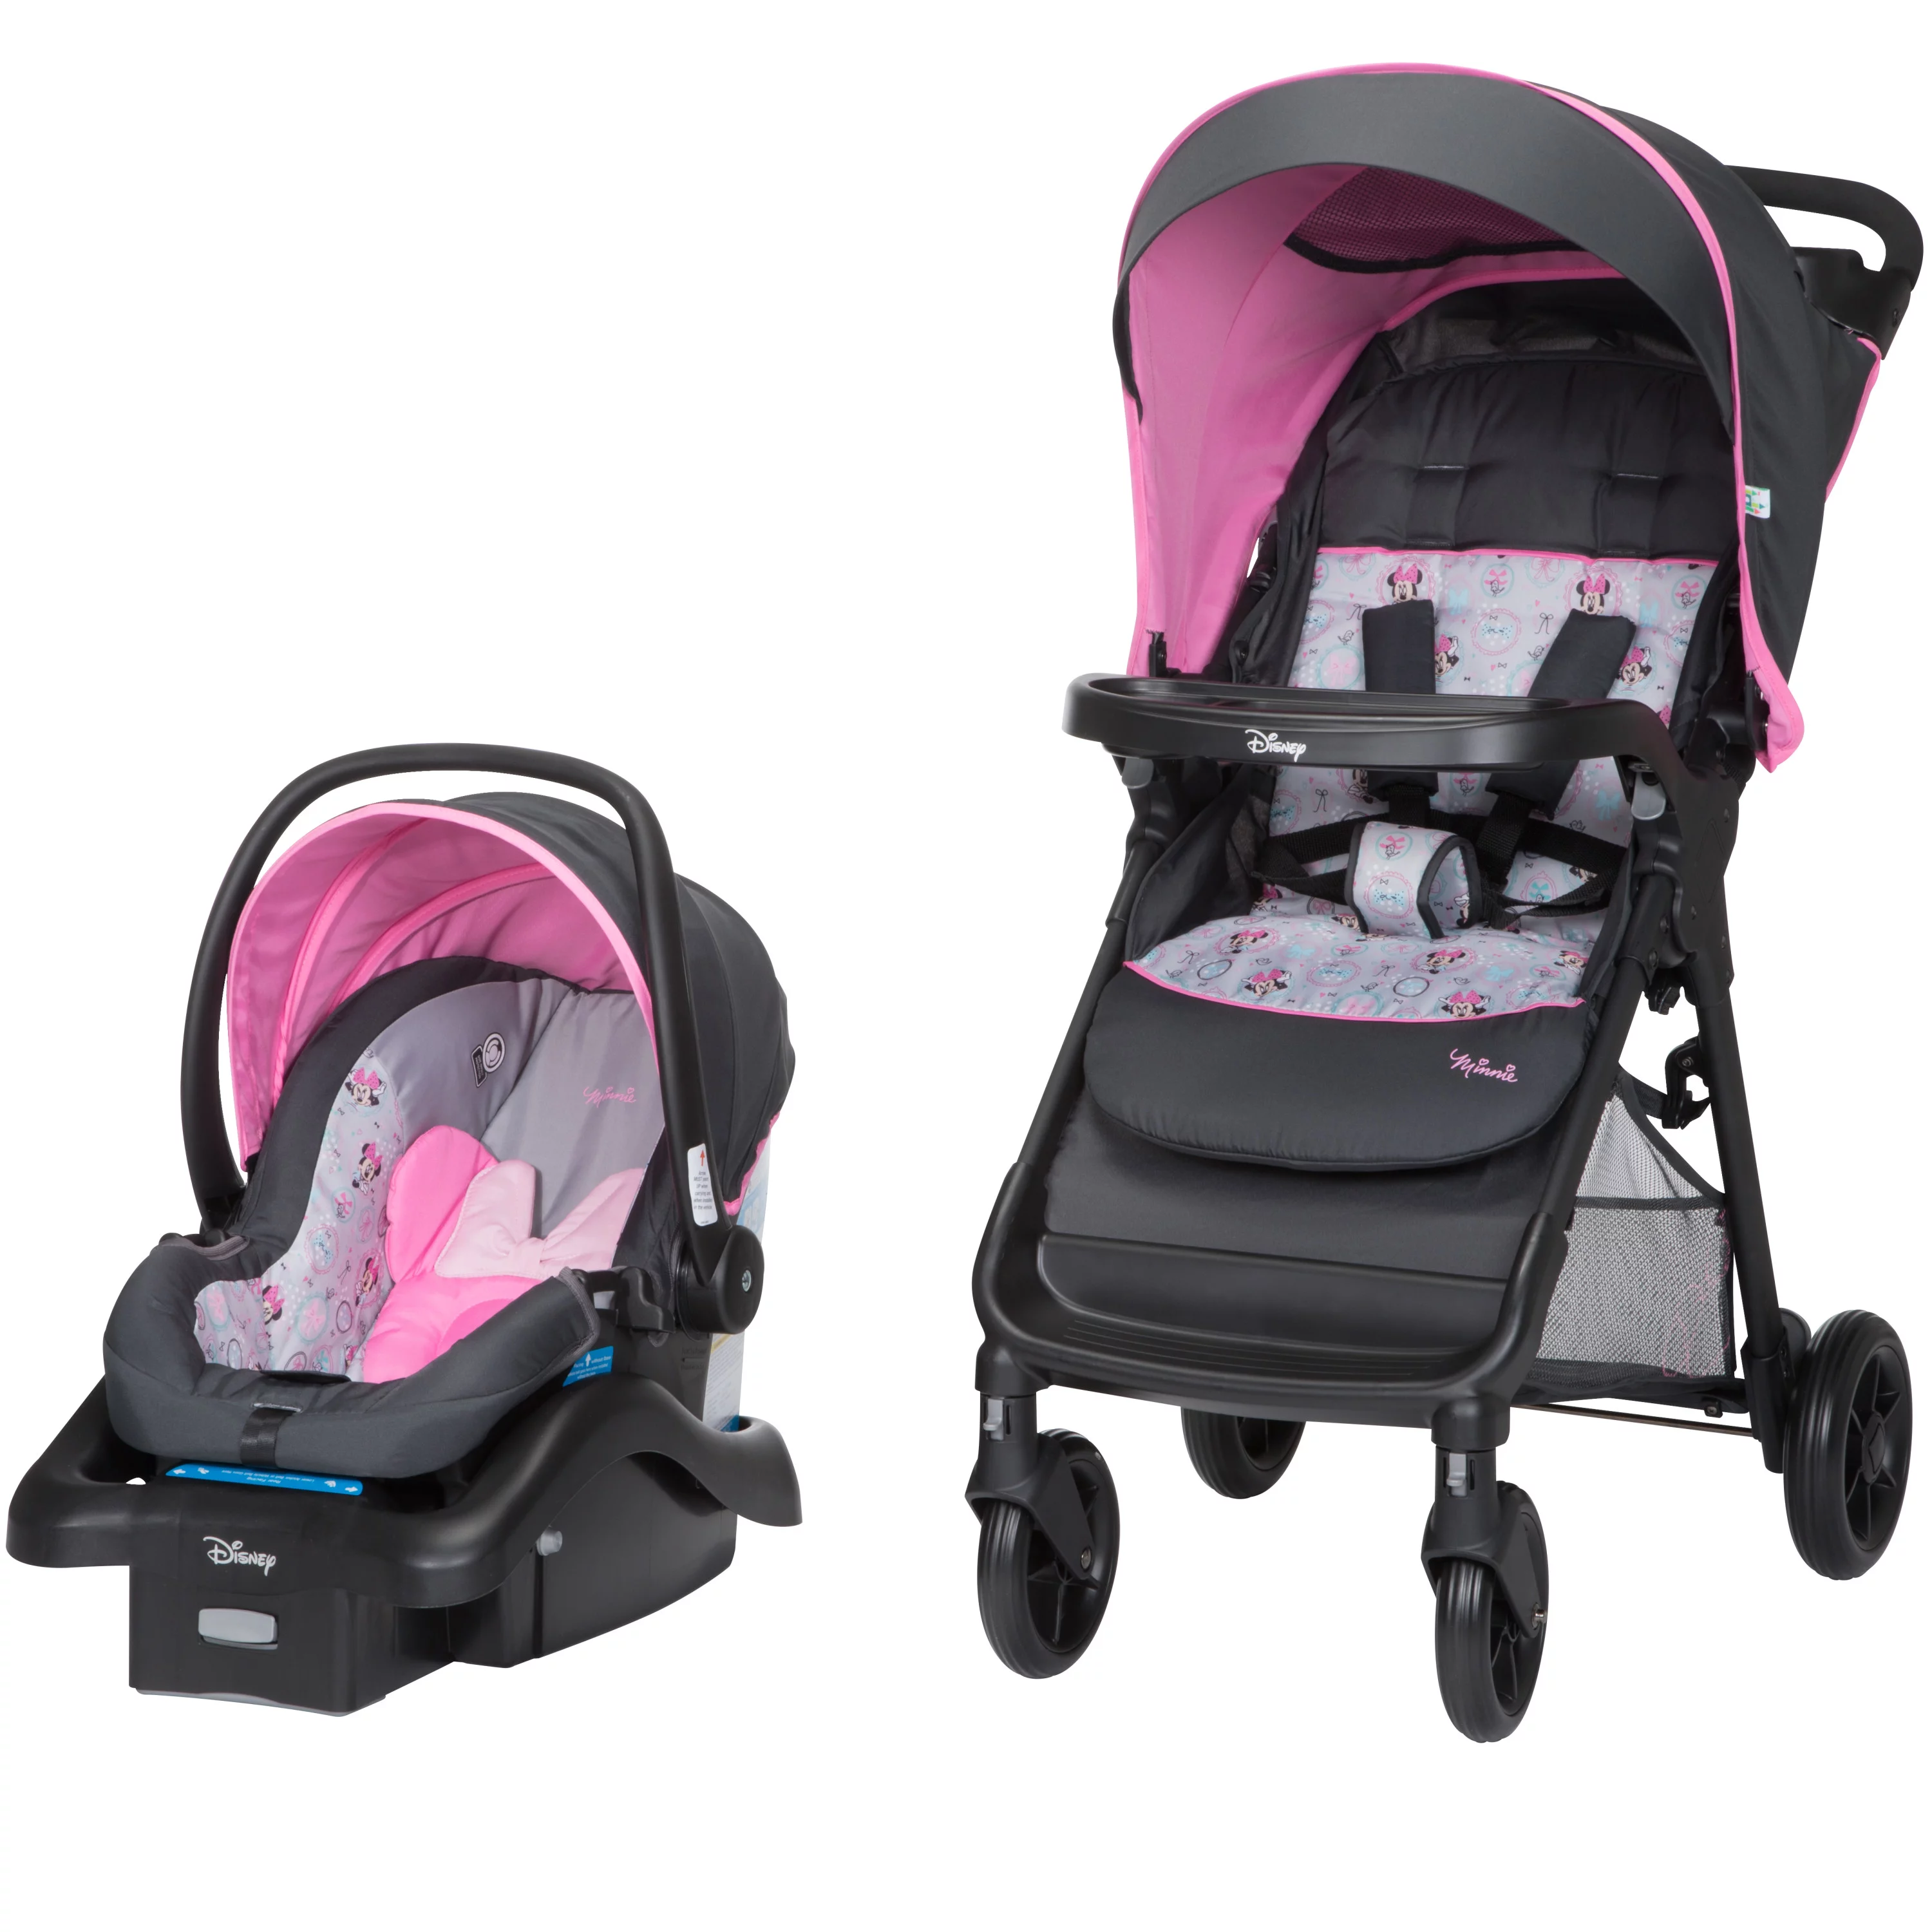 Disney Baby Minnie Mouse Smooth Ride Travel System